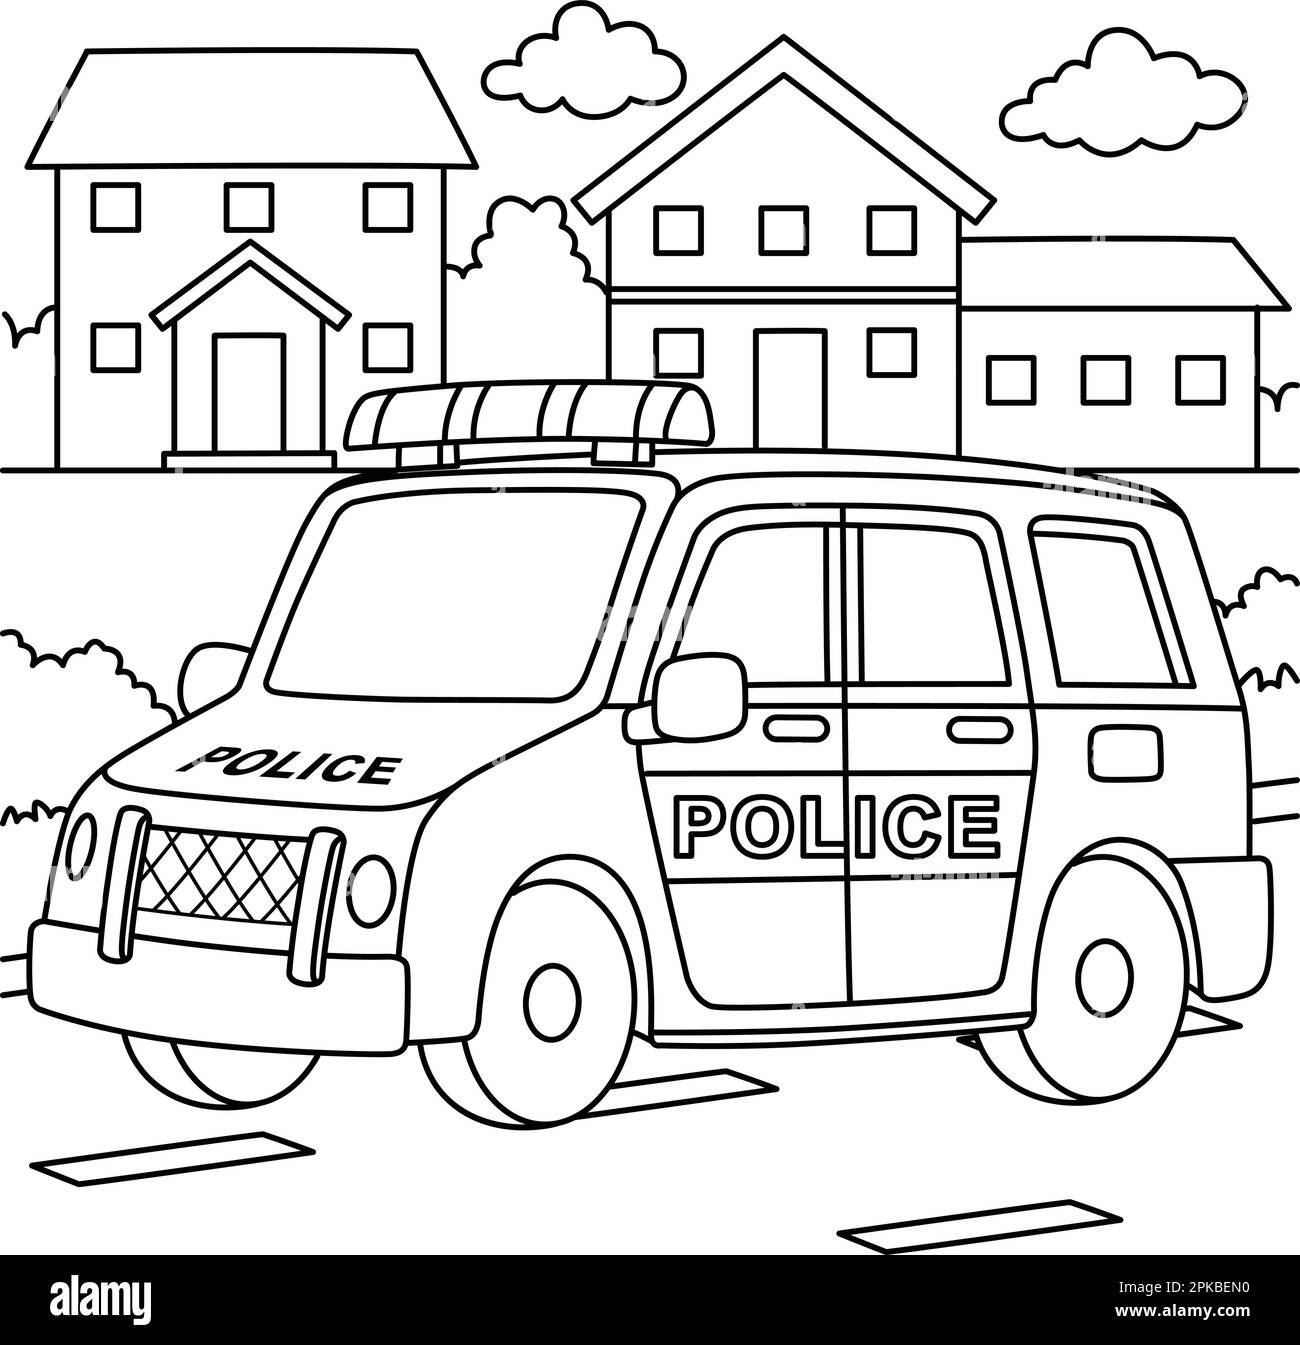 Police Car Coloring Page for Kids Stock Vector Image & Art - Alamy